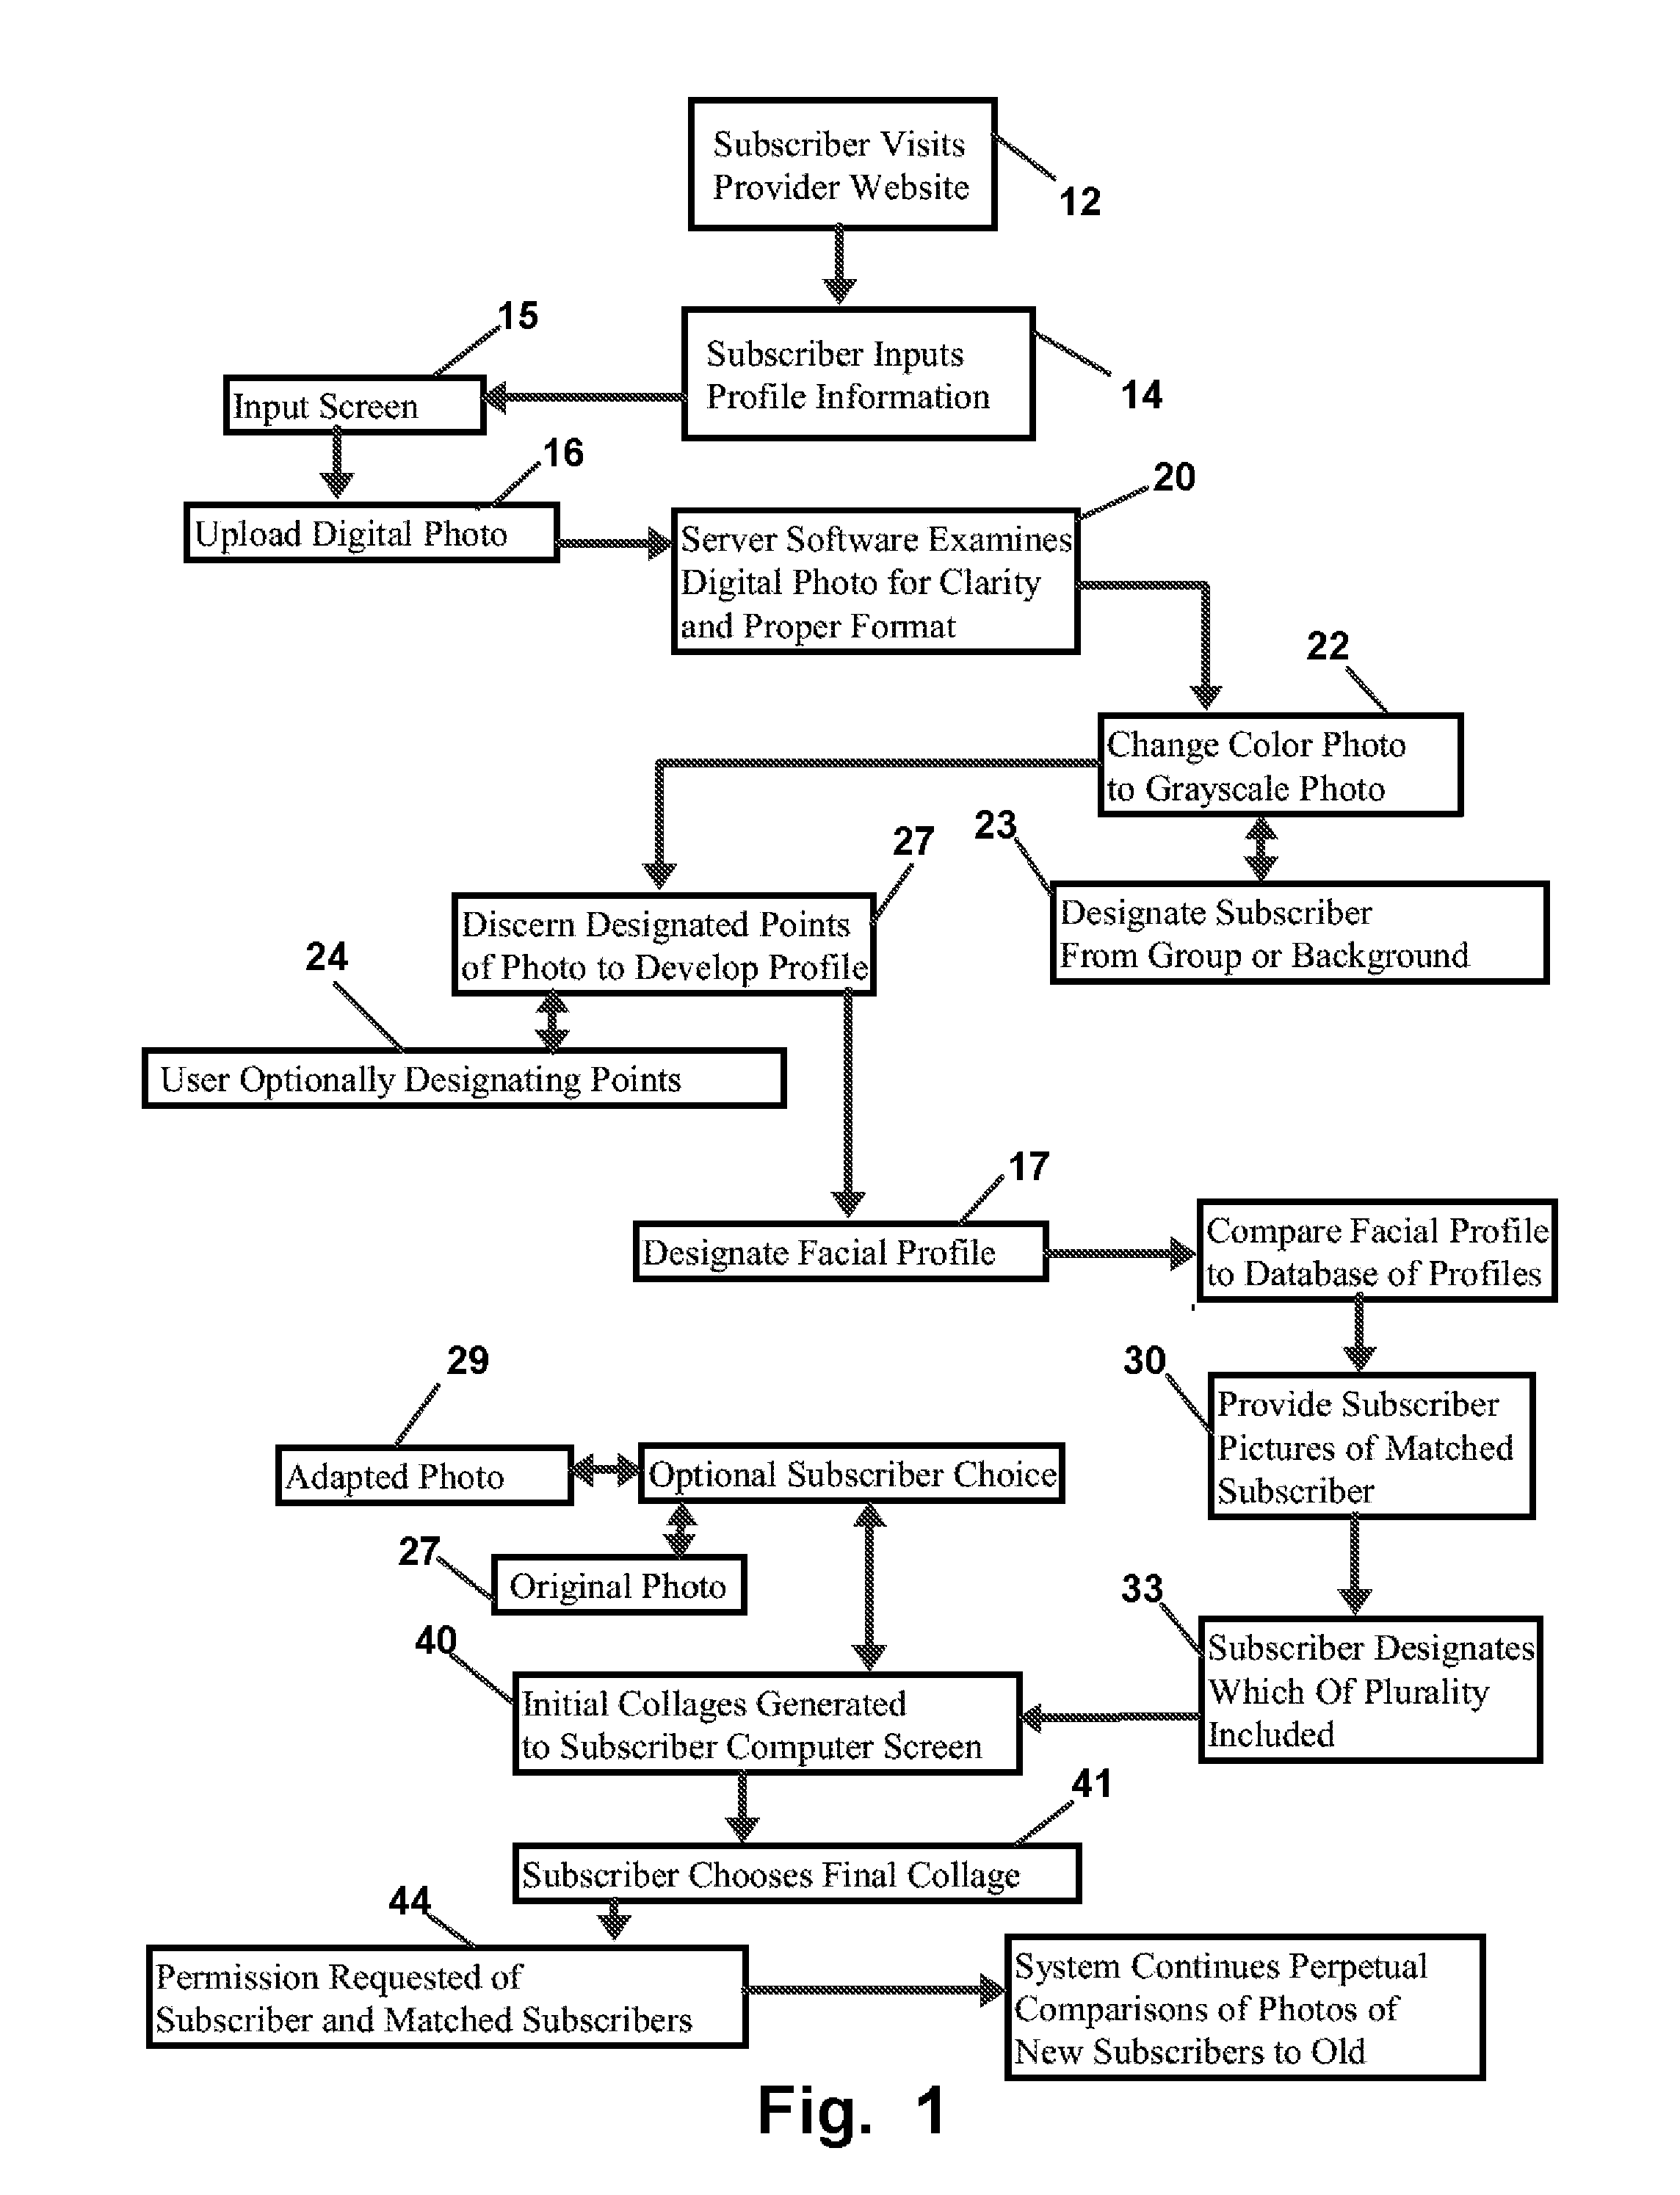 Method and Apparatus for Encouraging Social Networking Through Employment of Facial Feature Comparison and Matching